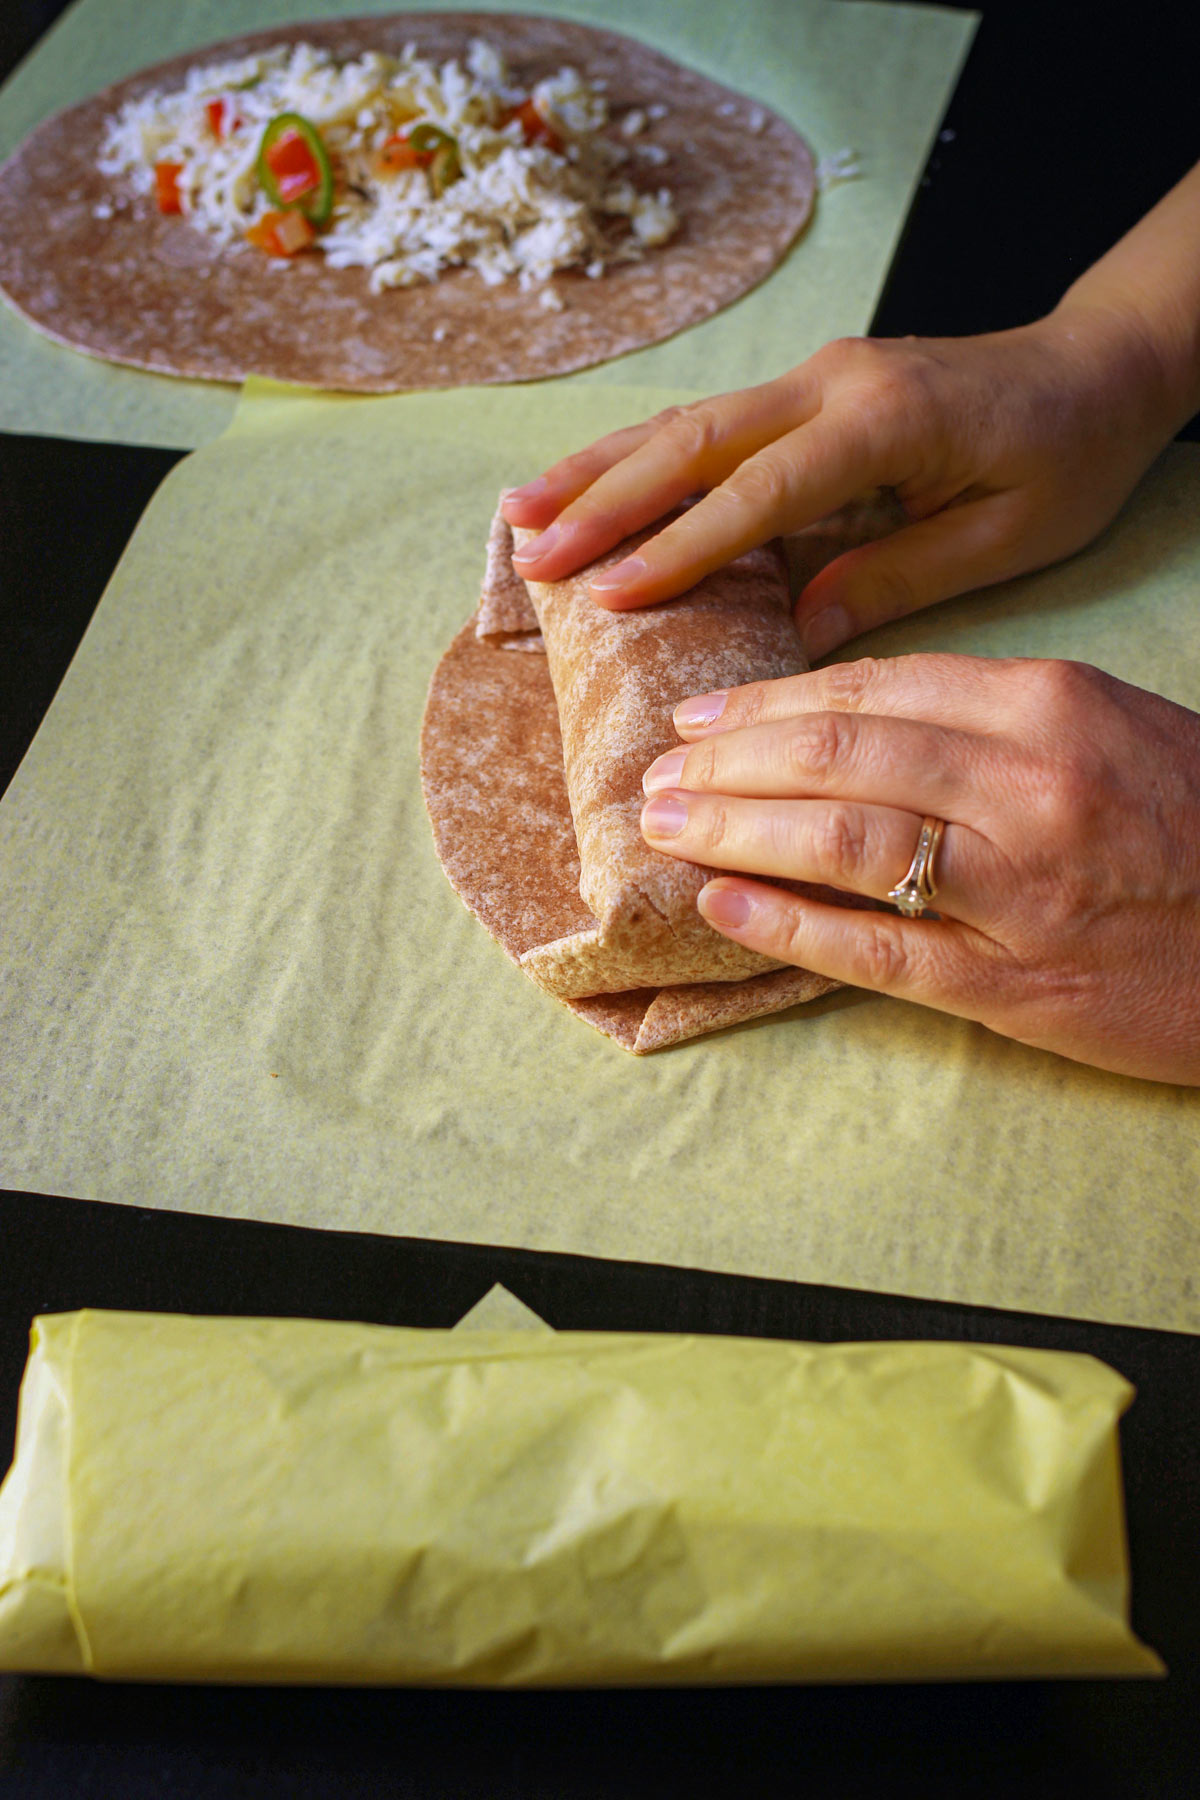 hand rolling the burrito the rest of the way.